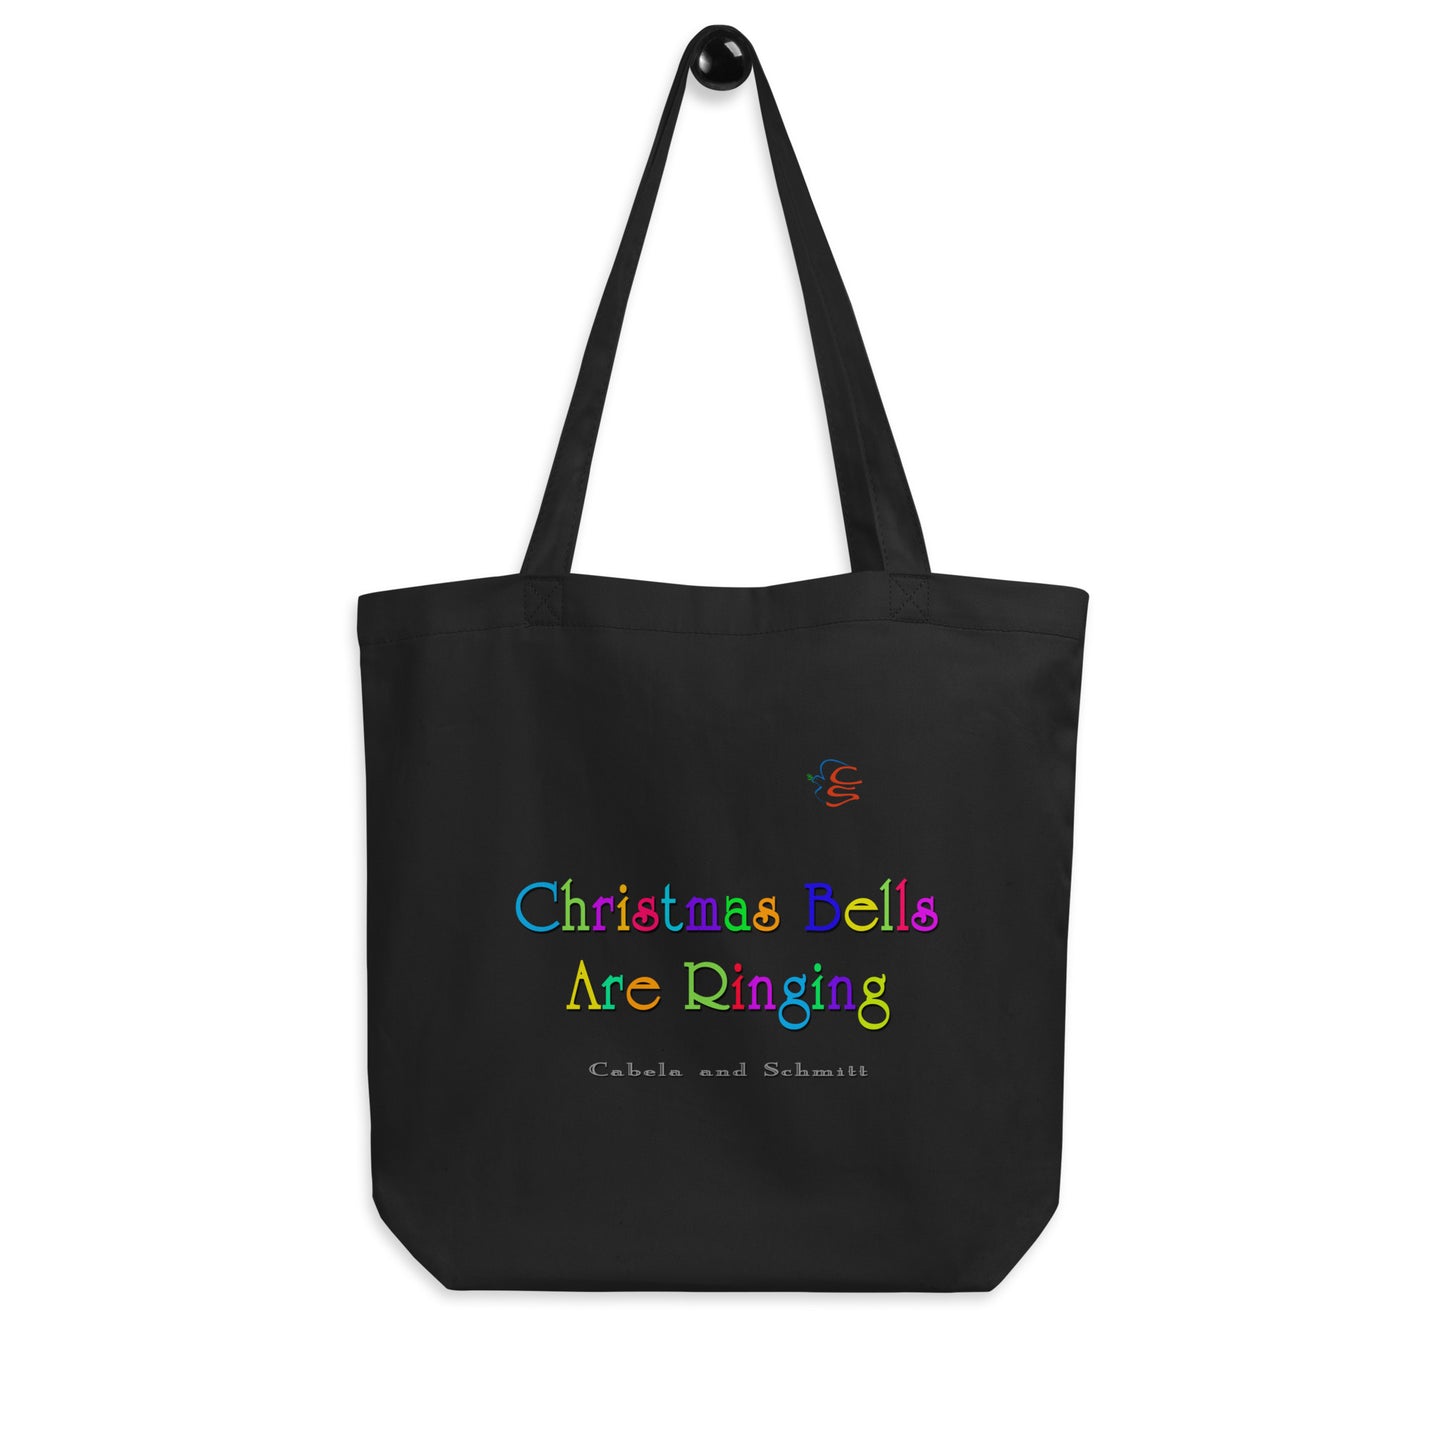 Eco Tote Bag "Christmas Bells Are Ringing"